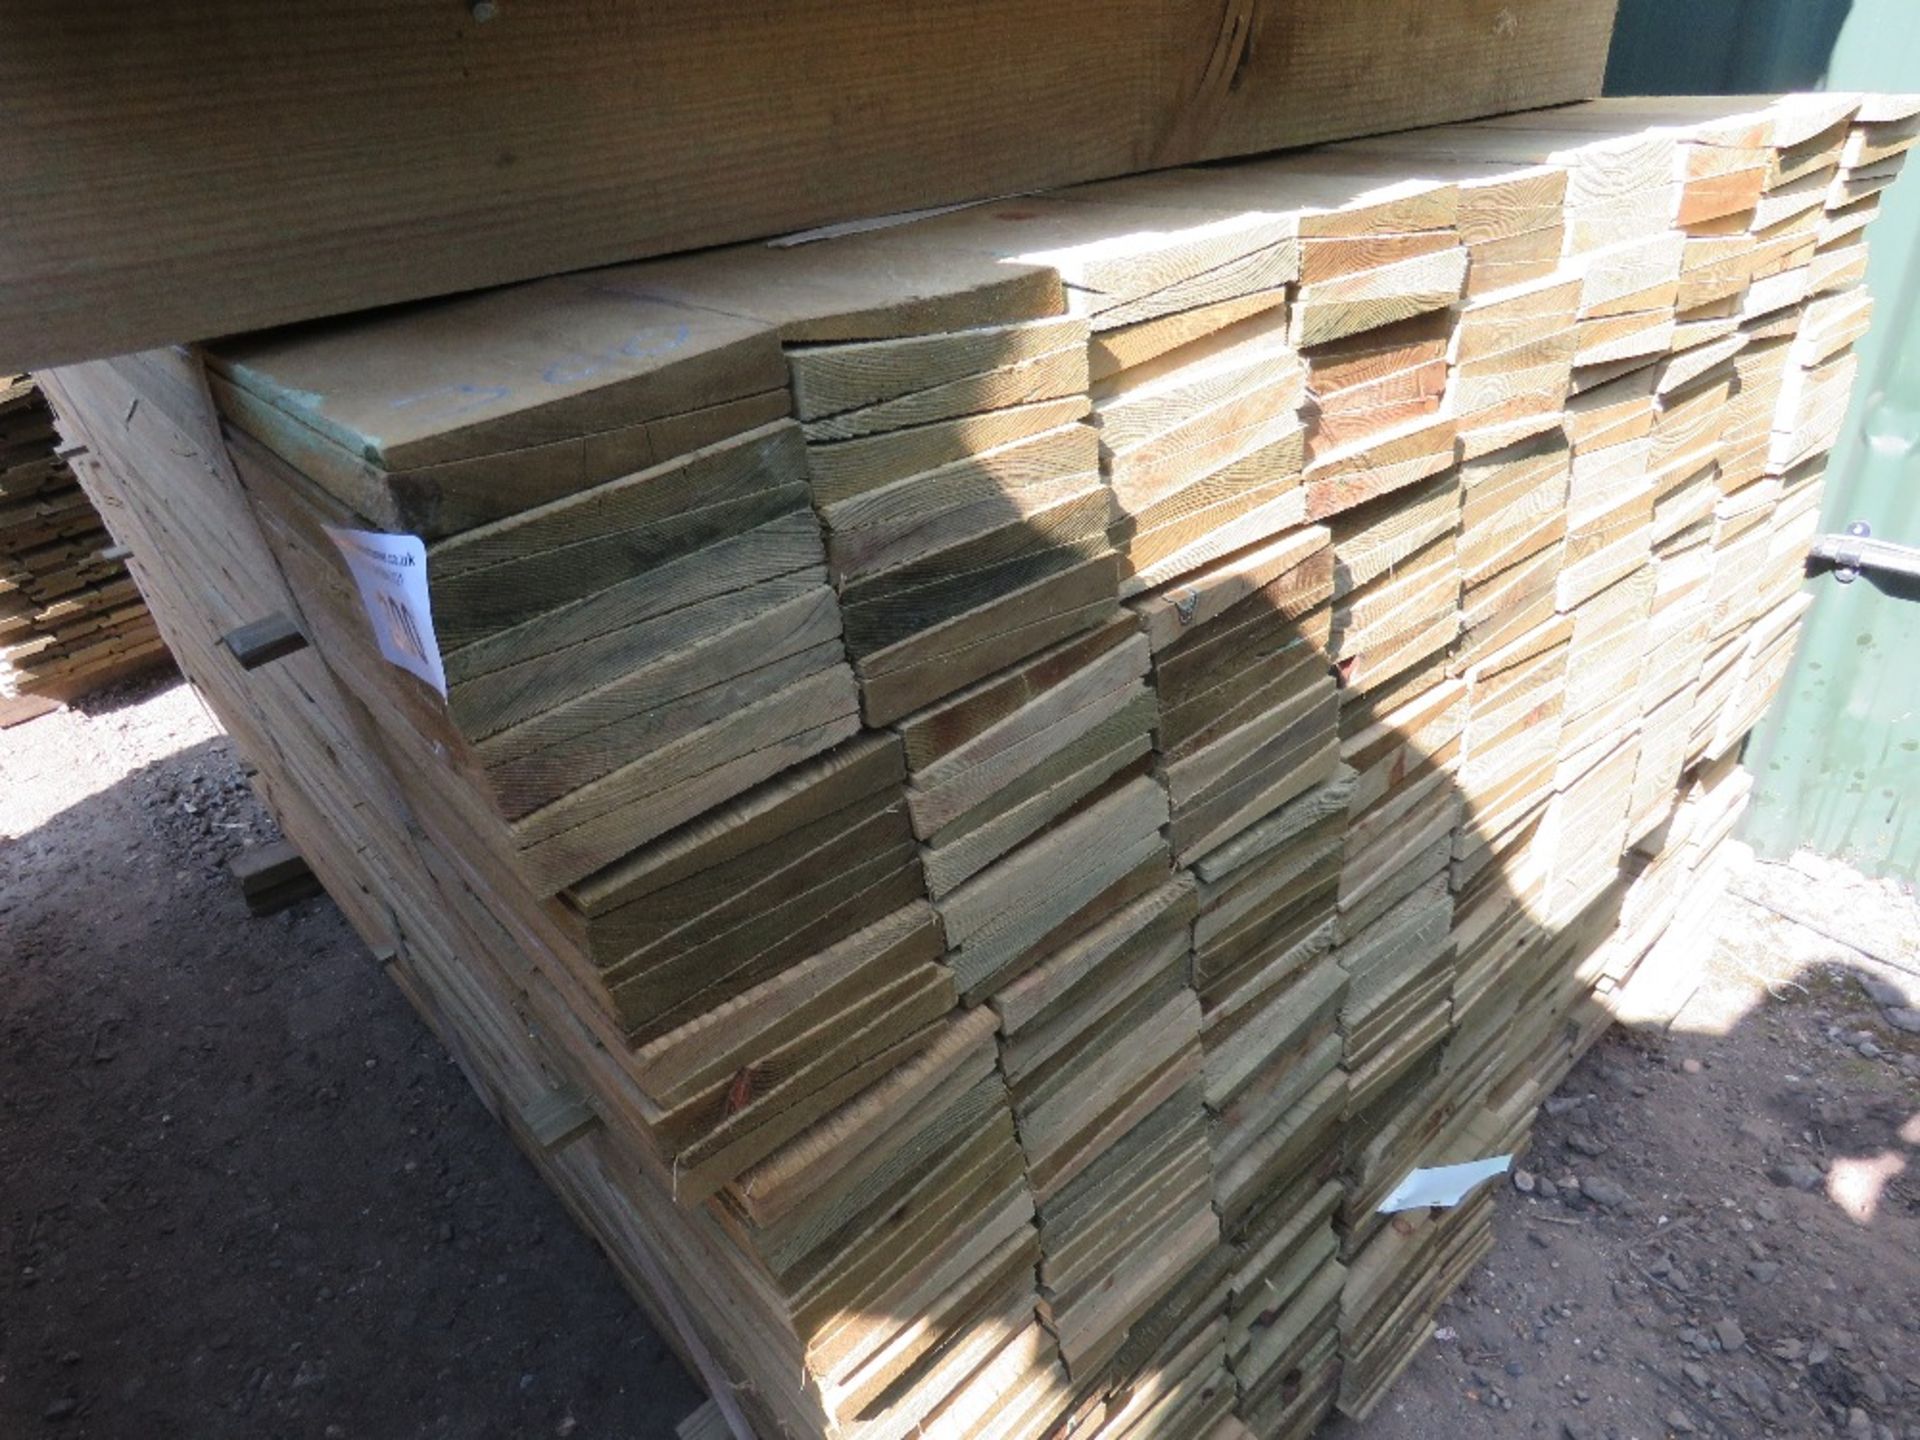 PACK OF PRESSURE TREATED FEATHER EDGE TIMBER FENCE CLADDING BOARDS, 1.50M LENGTH X 10.5CM WIDTH APPR